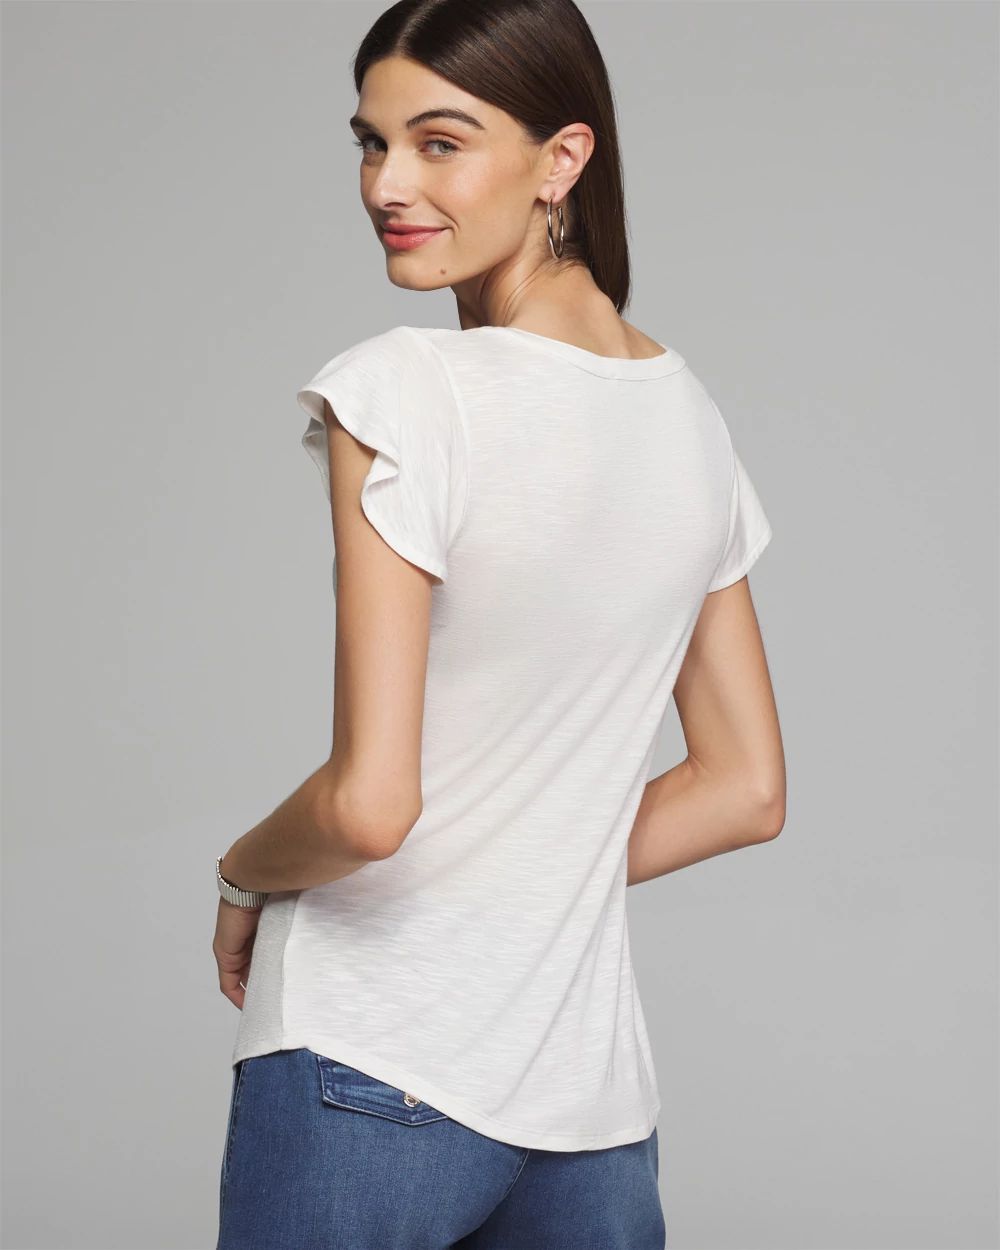 Outlet WHBM Notch Neck Ruffle Tee